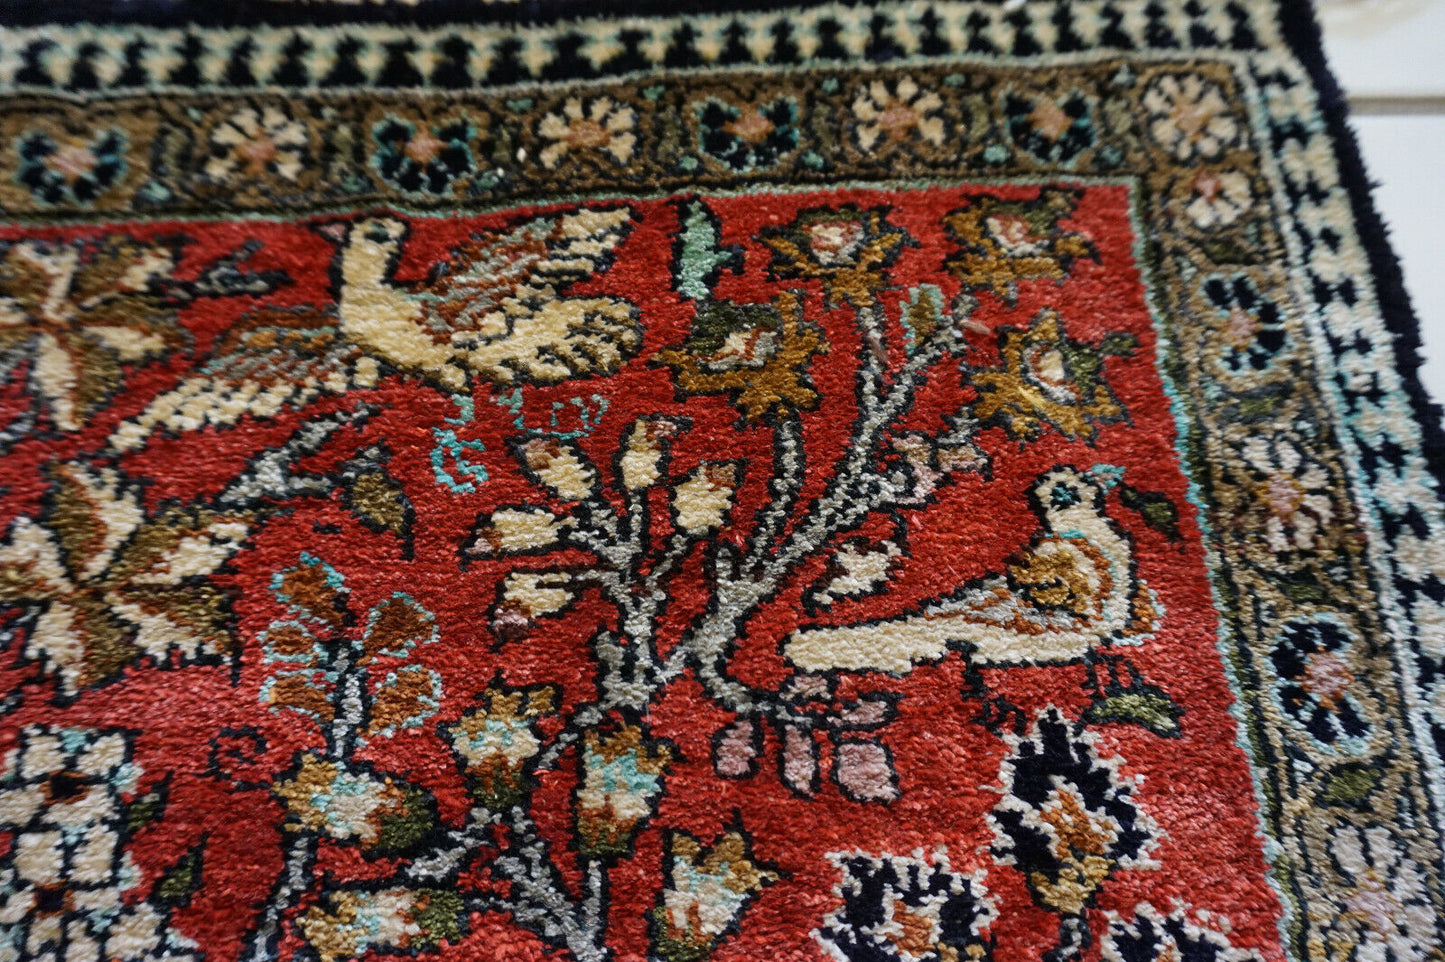 Side view of the Persian Qum silk rug highlighting its rectangular shape and size